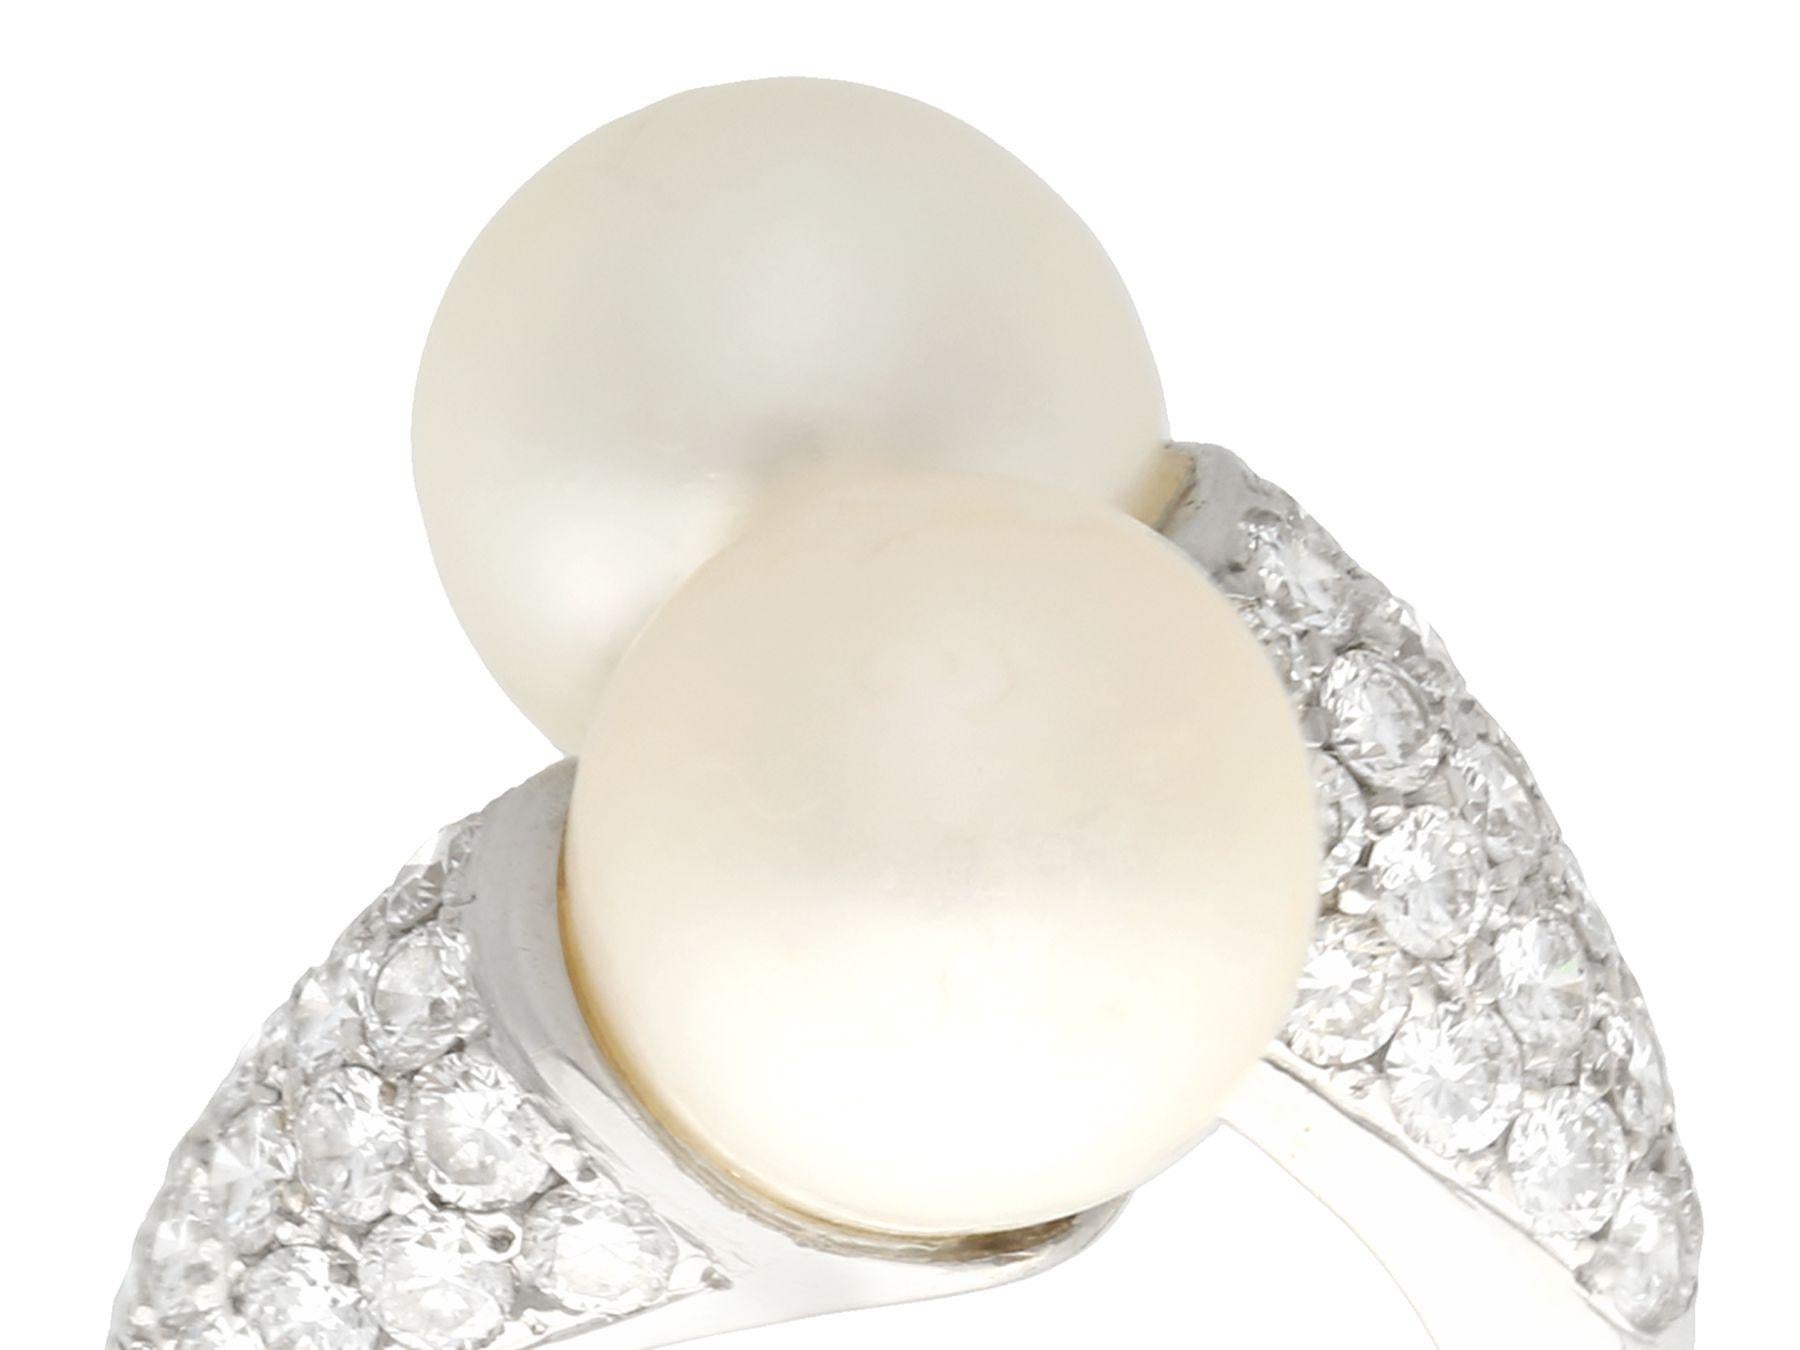 A stunning, fine and impressive cultured pearl and 1.70 carat diamond, 18 karat white gold twist design cocktail ring; part of our diverse vintage jewelry and estate jewelry collections

This fine and impressive Vintage pearl ring has been crafted